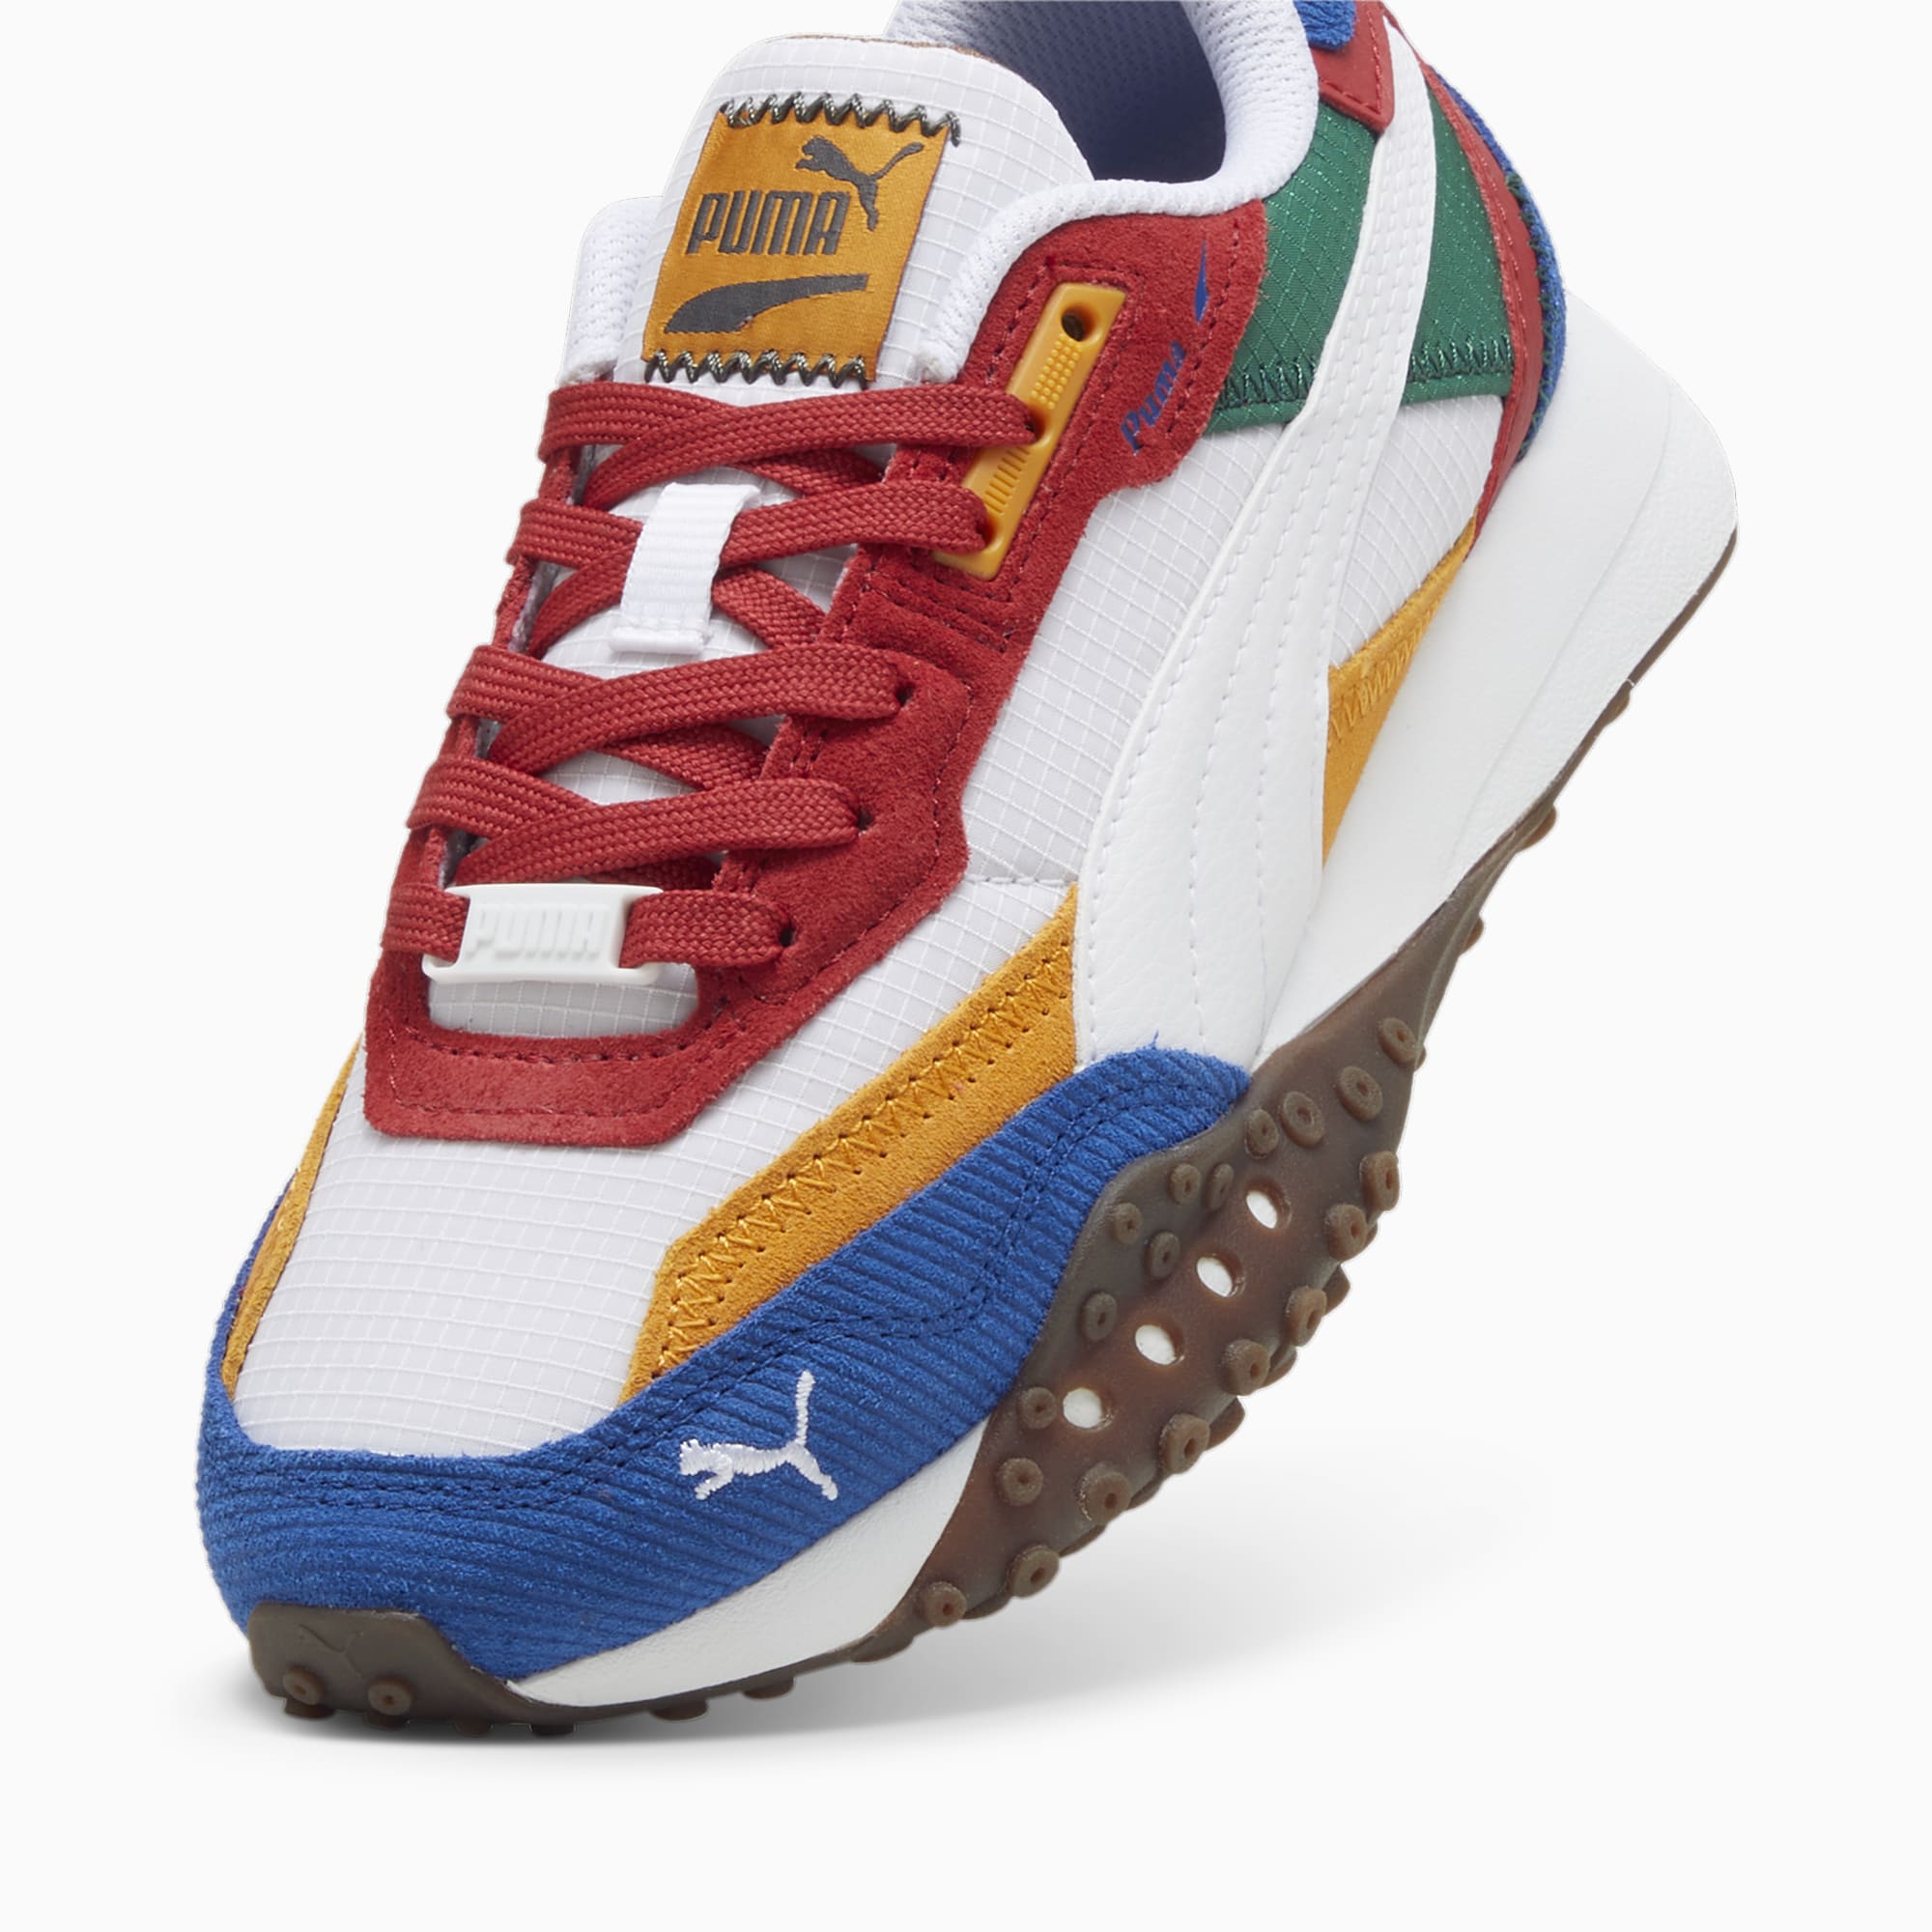 PUMA Blktop Rider Multicolour Youth Sneakers, White/Club Red